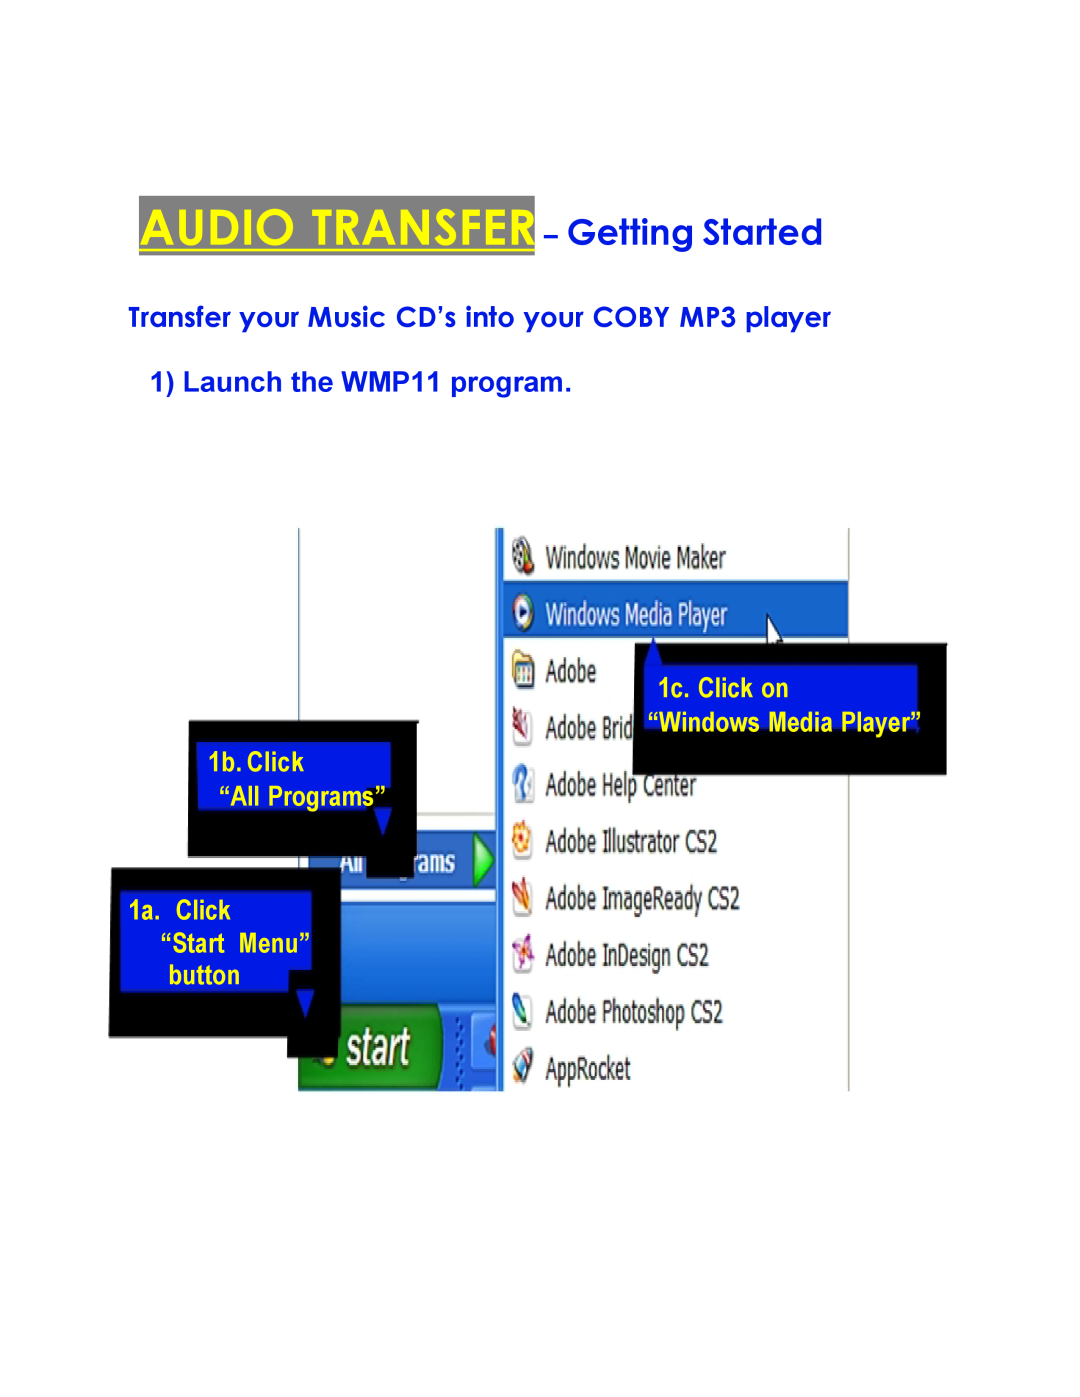 COBY electronic MPC7055 setup guide AUDIO TRANSFER- Getting Started, Launch the WMP11 program 